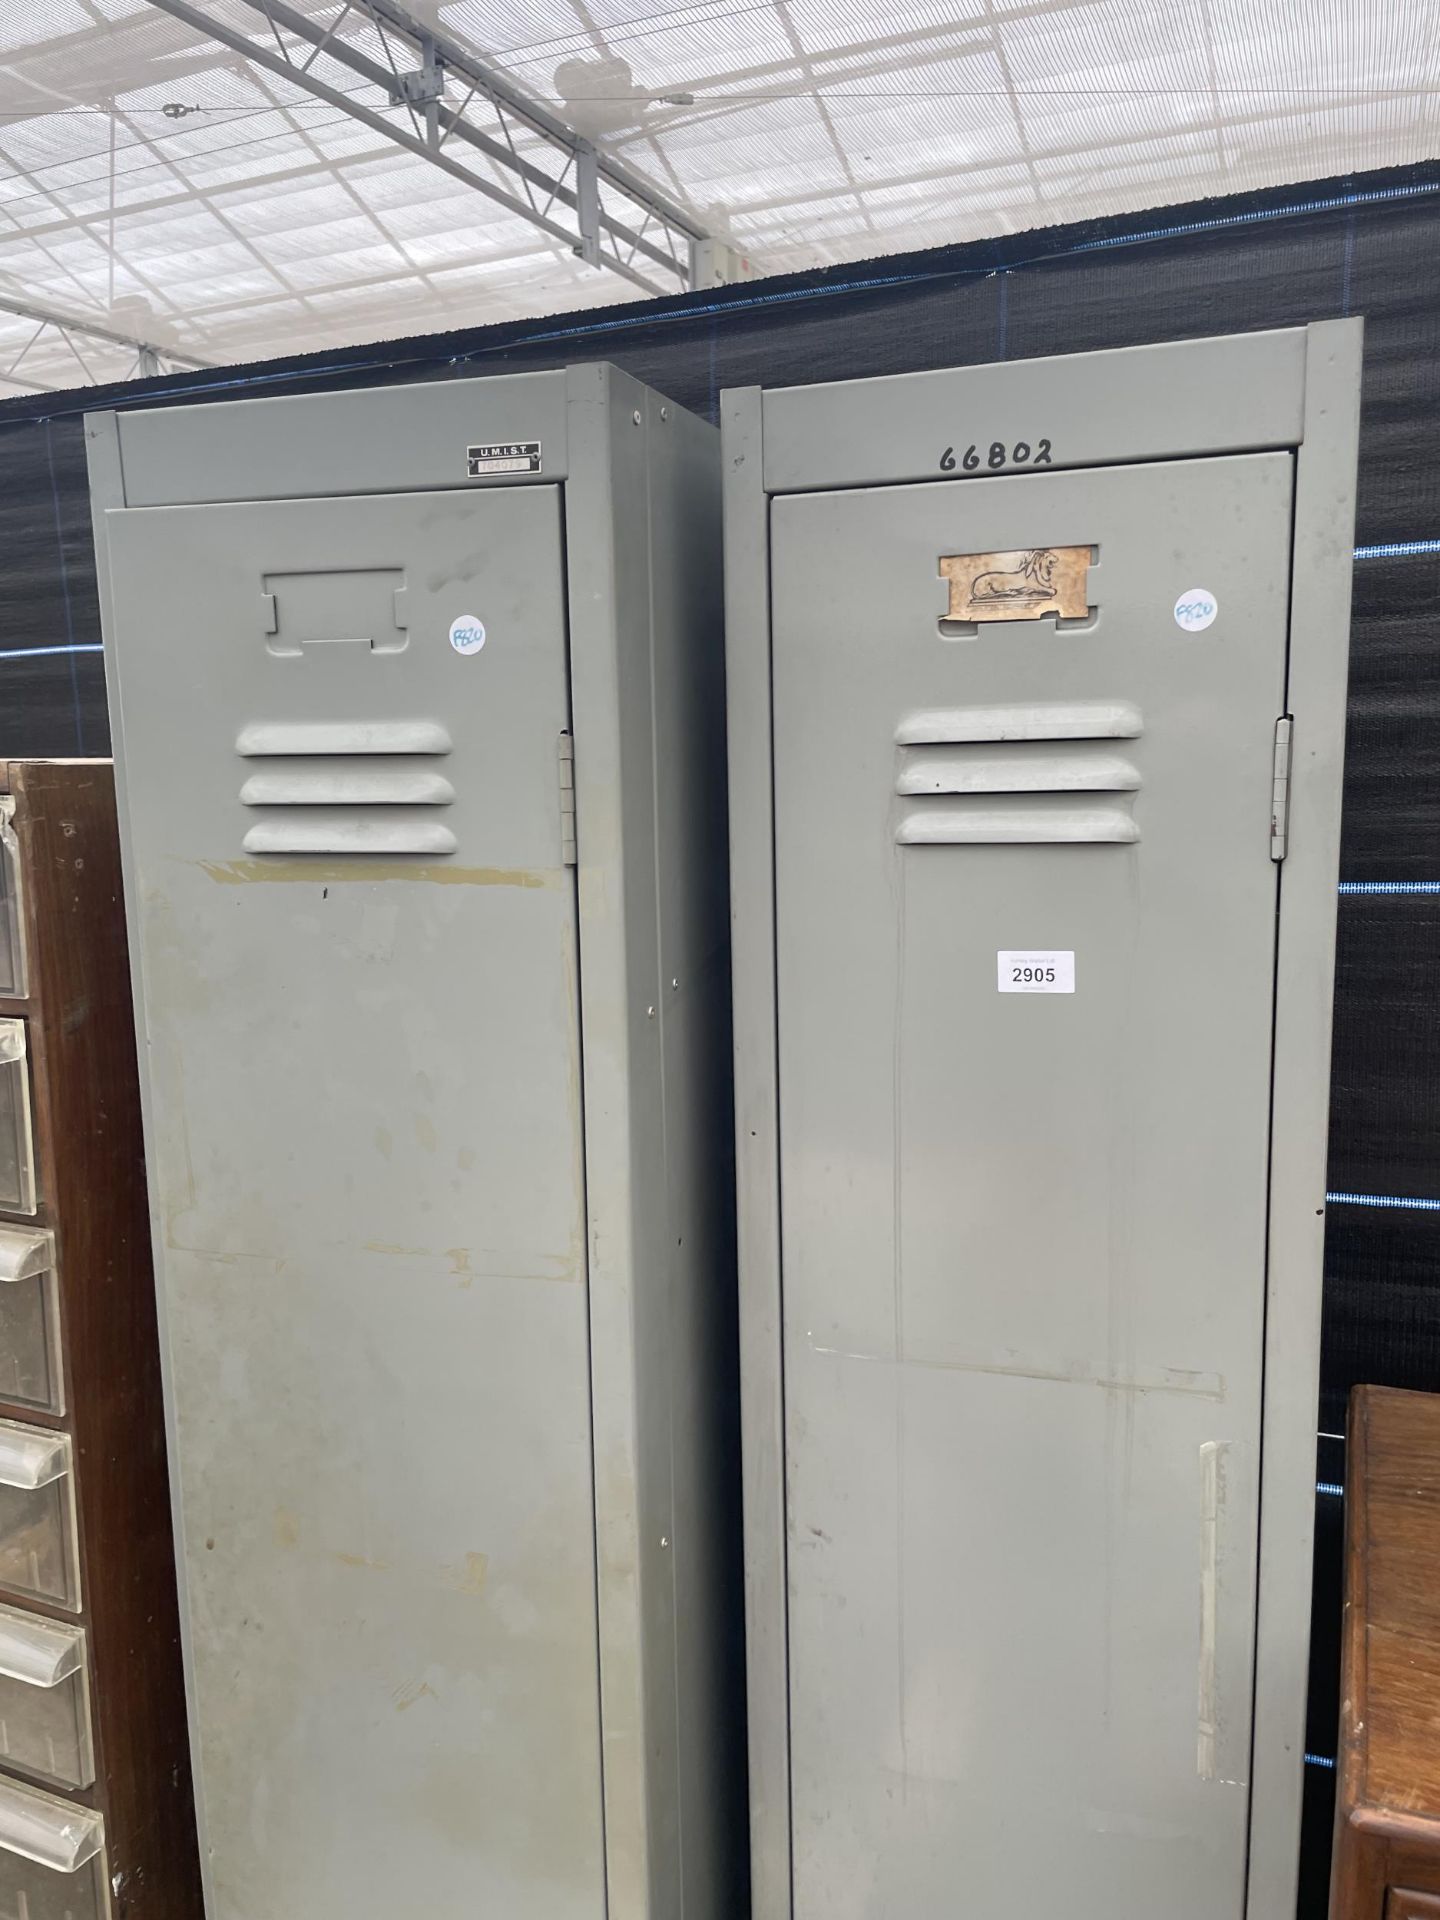 TWO 'LION STEEL' METAL LOCKERS, 12" WIDE, ONE MARKED U.M.I.S.T - Image 2 of 3